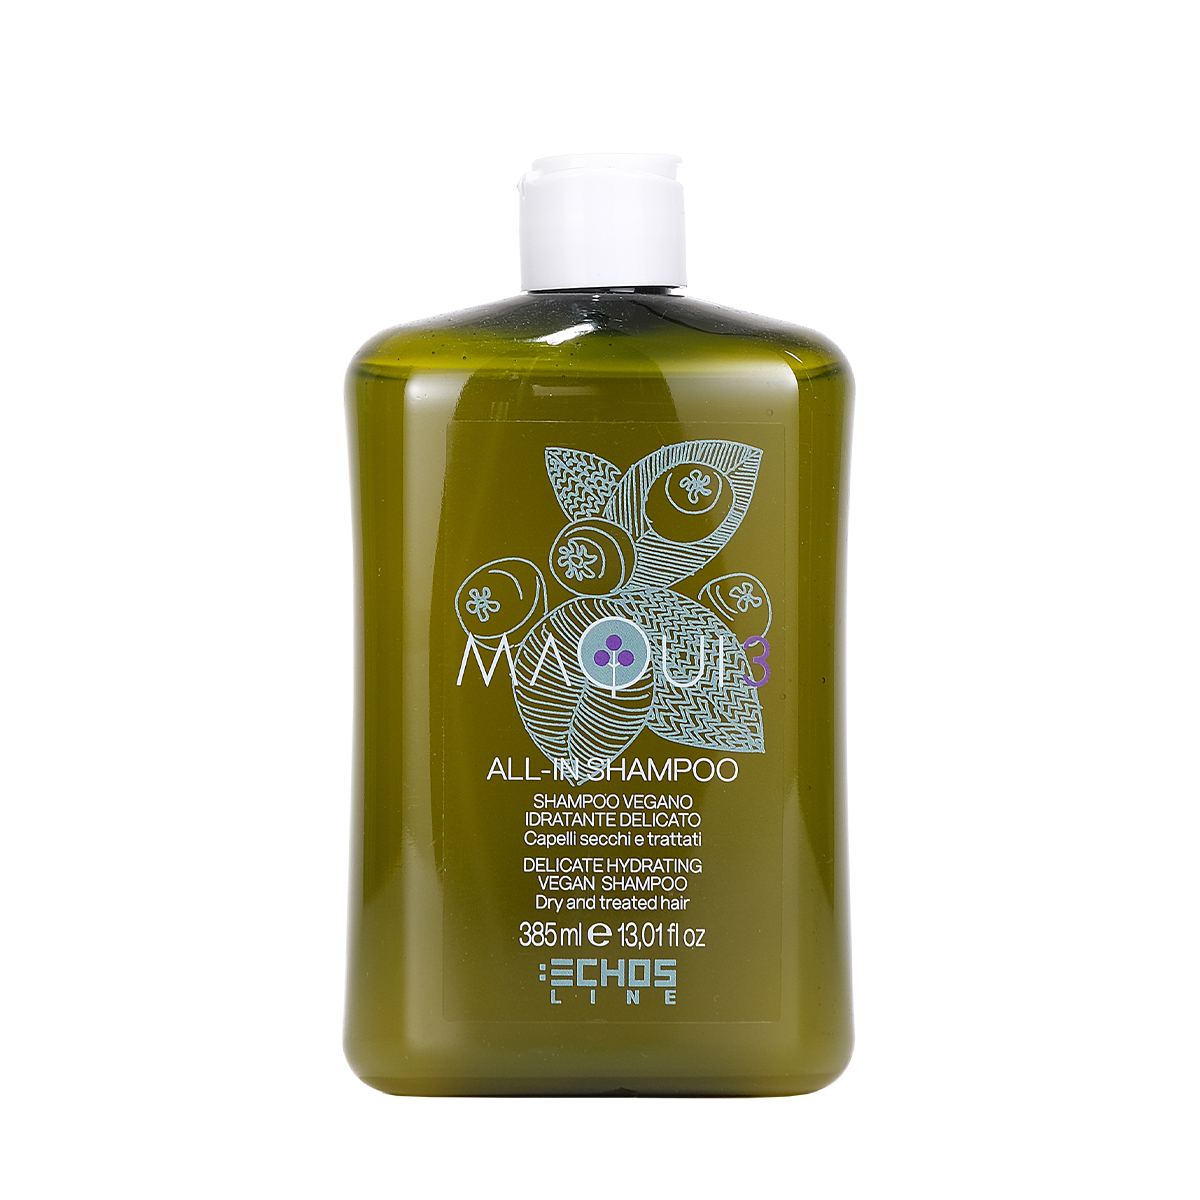 Delicate hydrating vegan shampoo dry and treated hair Maqui 3